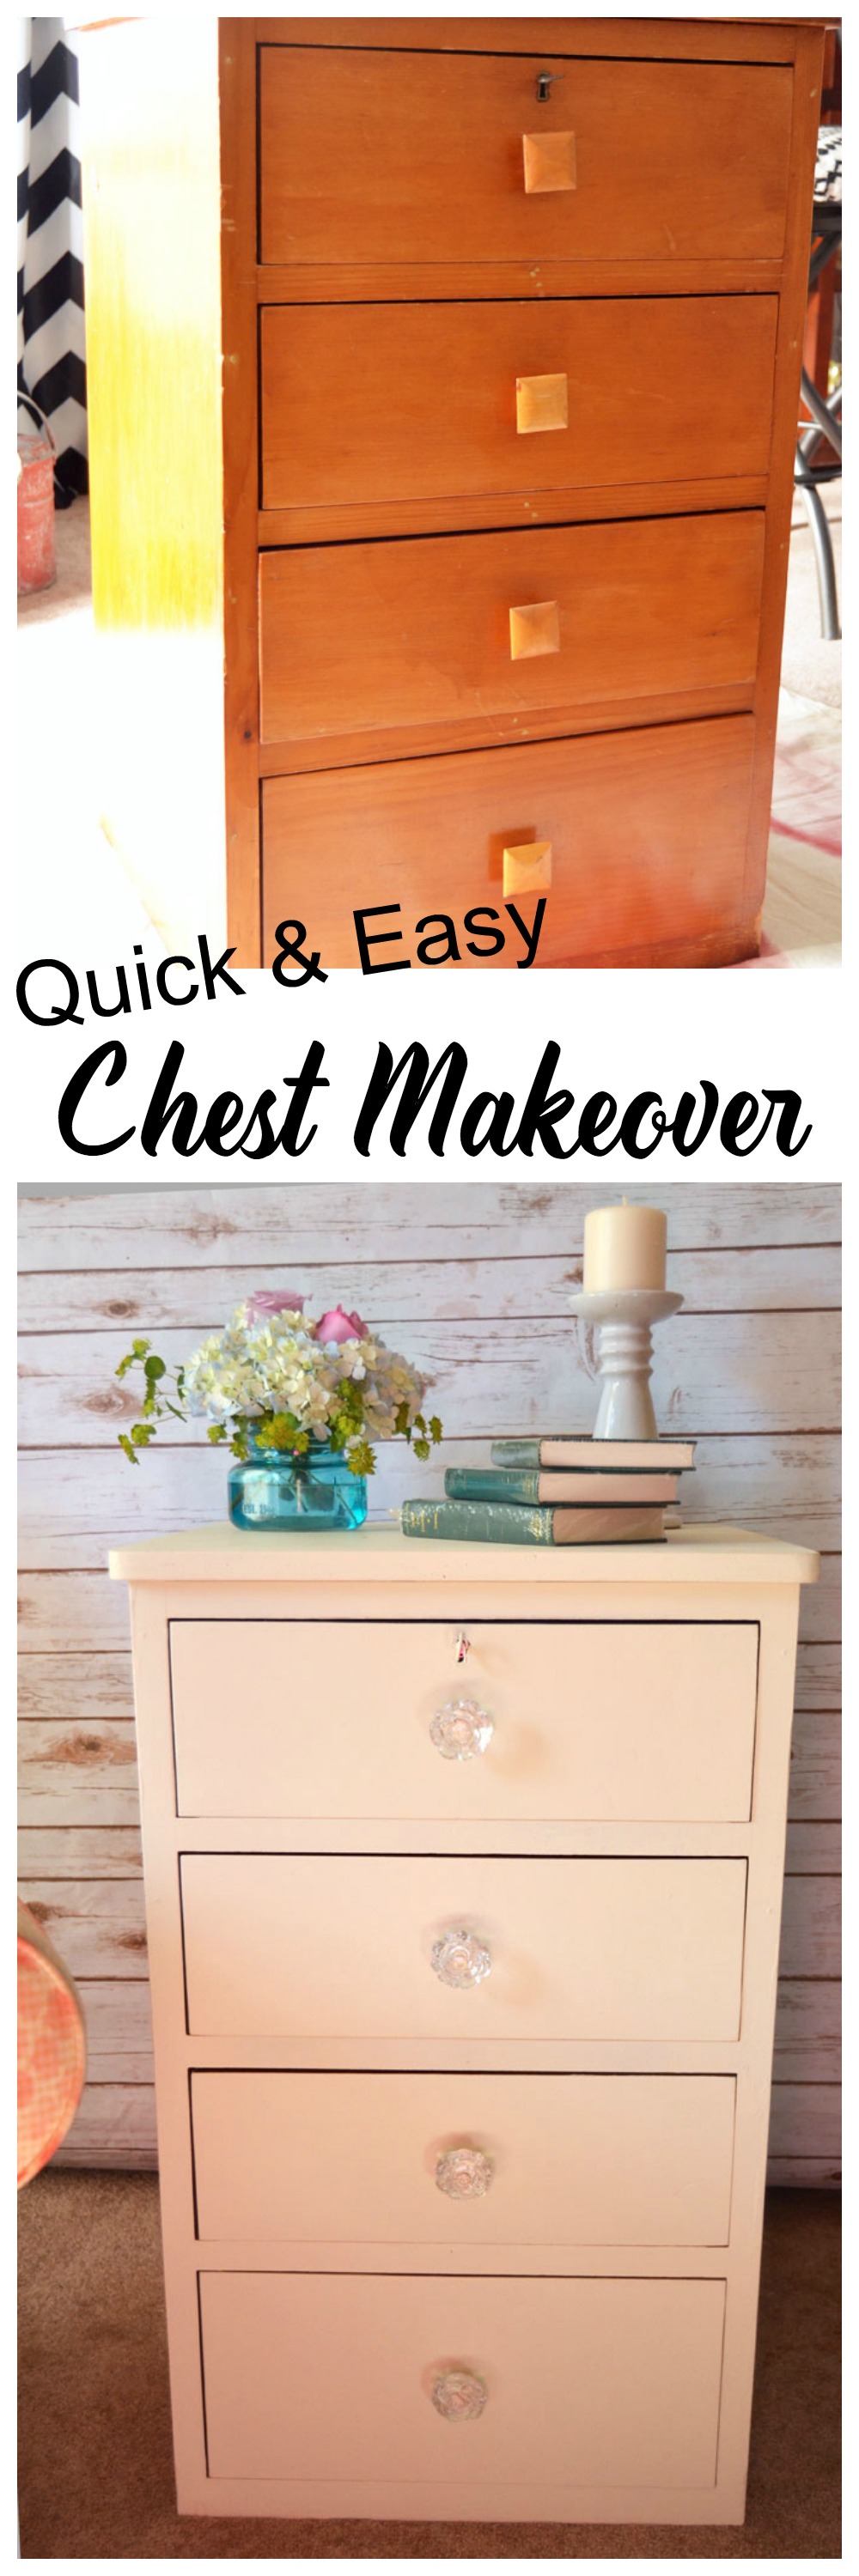 Quick and Easy Chest of Drawers Makeover with Milk Paint